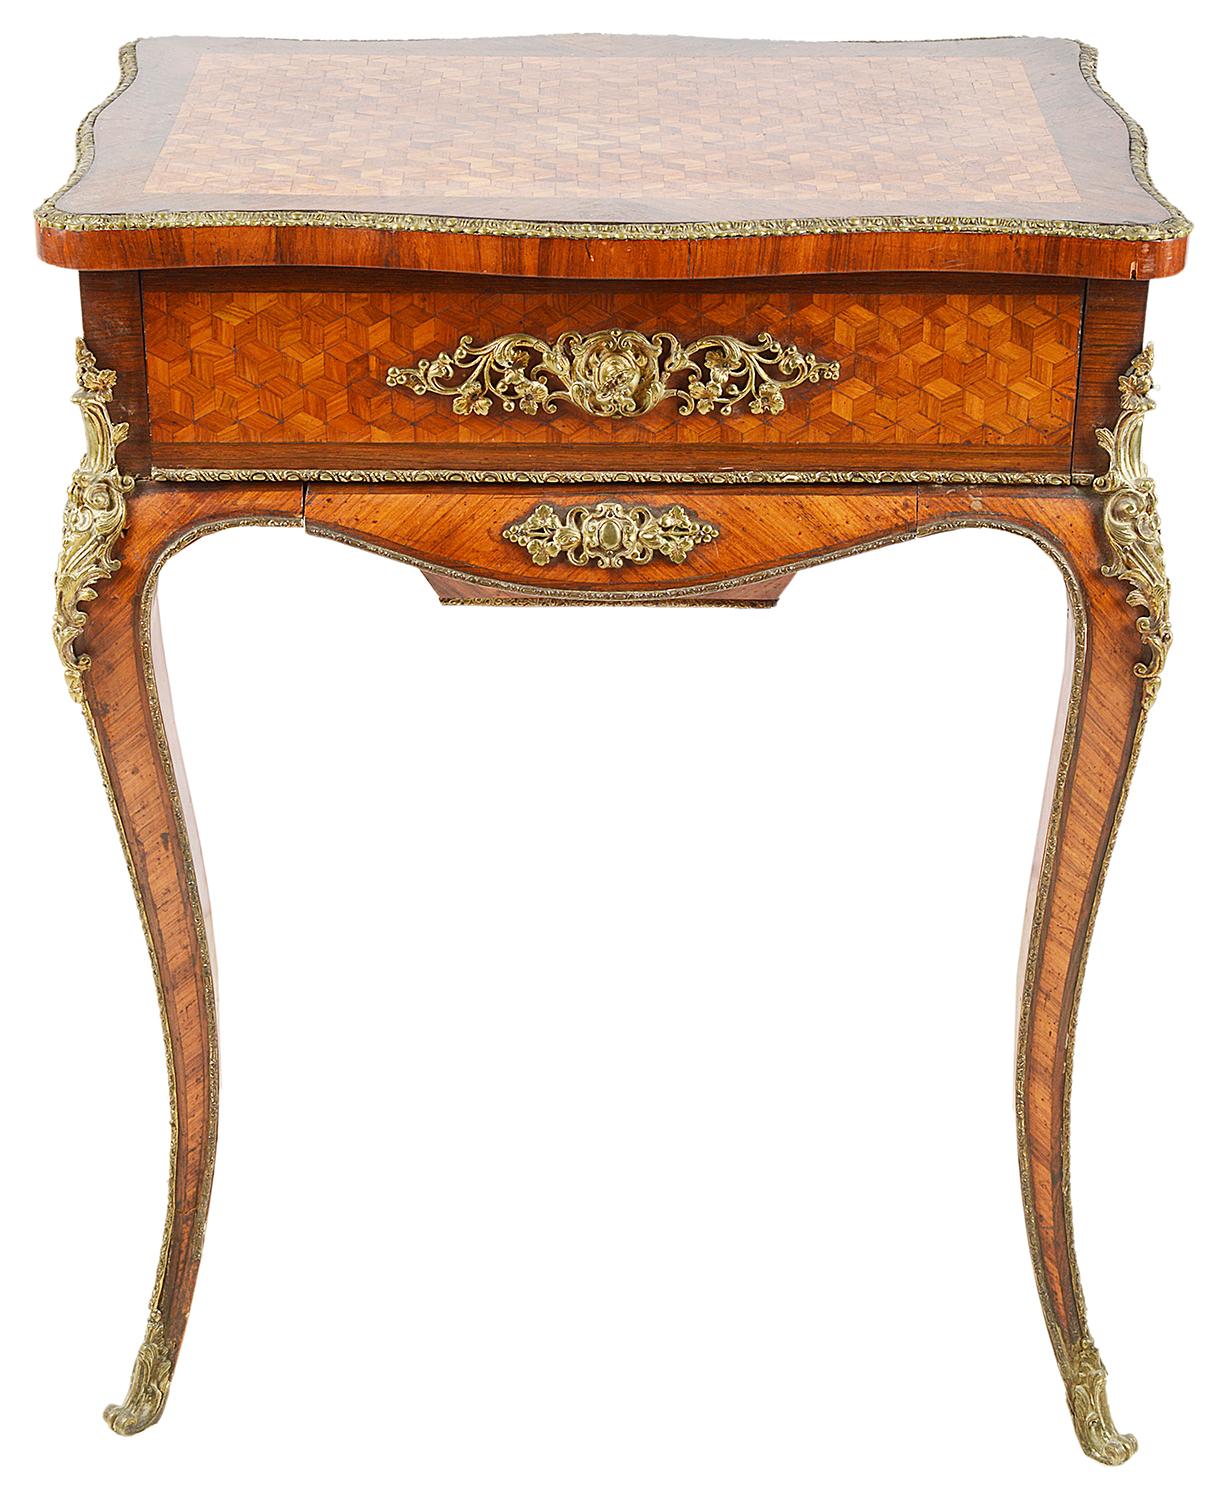 A very good quality late 19th century parquetry inlaid side table, having a hinged top, opening to reveal compartments within, gilded ormolu mounts and raised on elegant cabriole legs, terminating in scrolling ormolu feet.